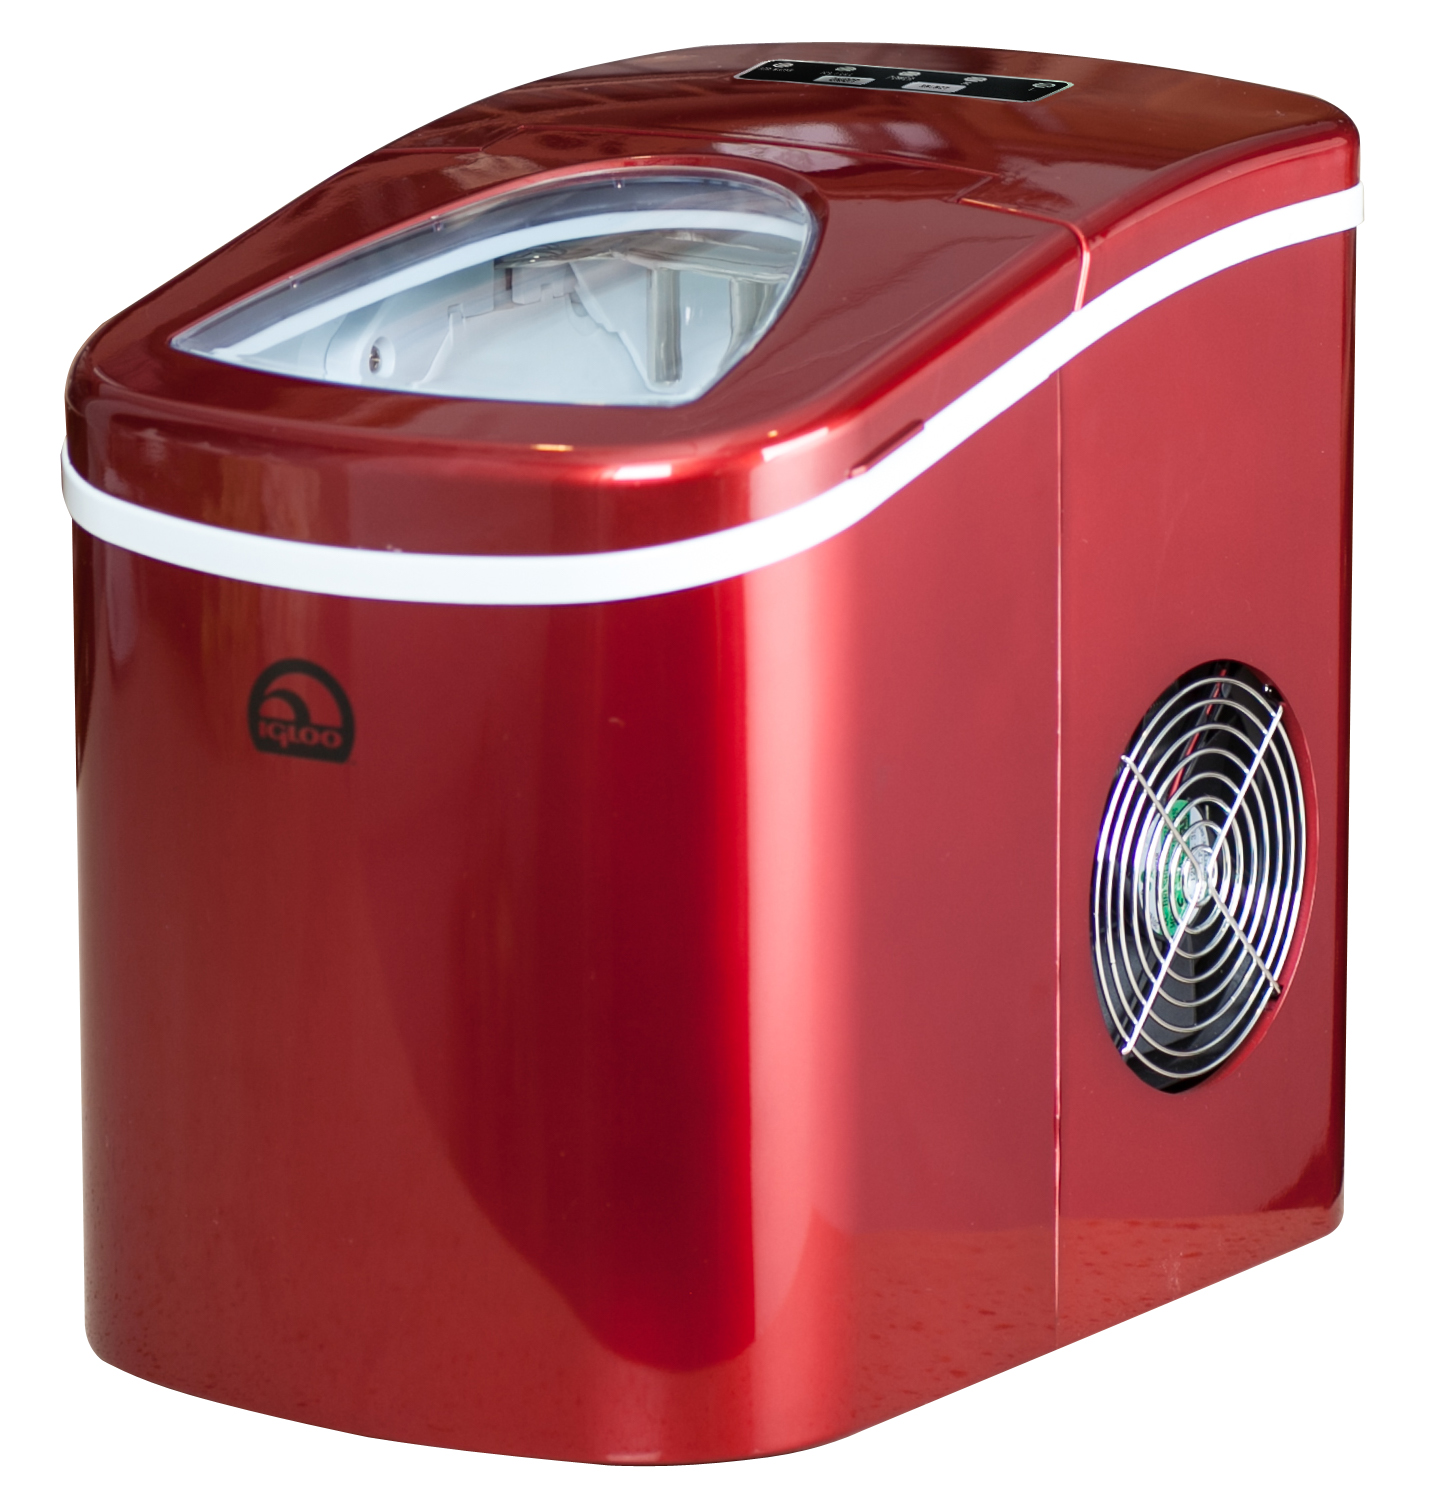 Igloo Portable Ice Maker ICE108 - Red